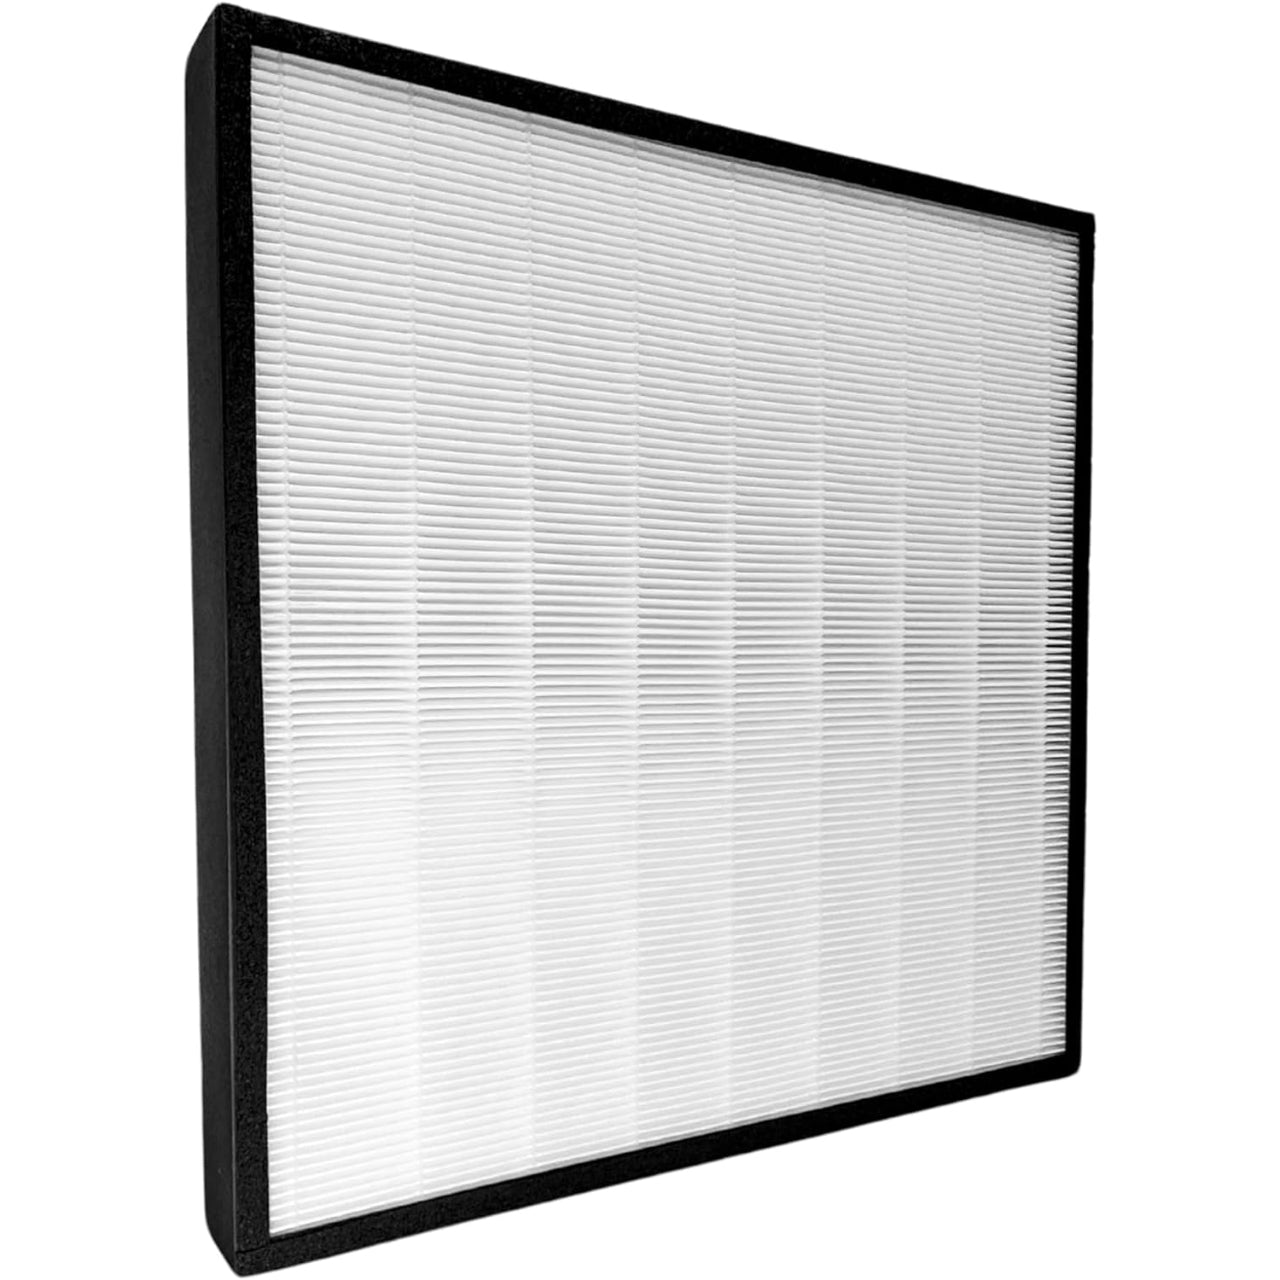 Nispira True HEPA Filter Replacement For Air Purifier Whirlpool Whispure WPPRO2000 1183050K Extra Large | Remove Smoke, Pollen, Dust |